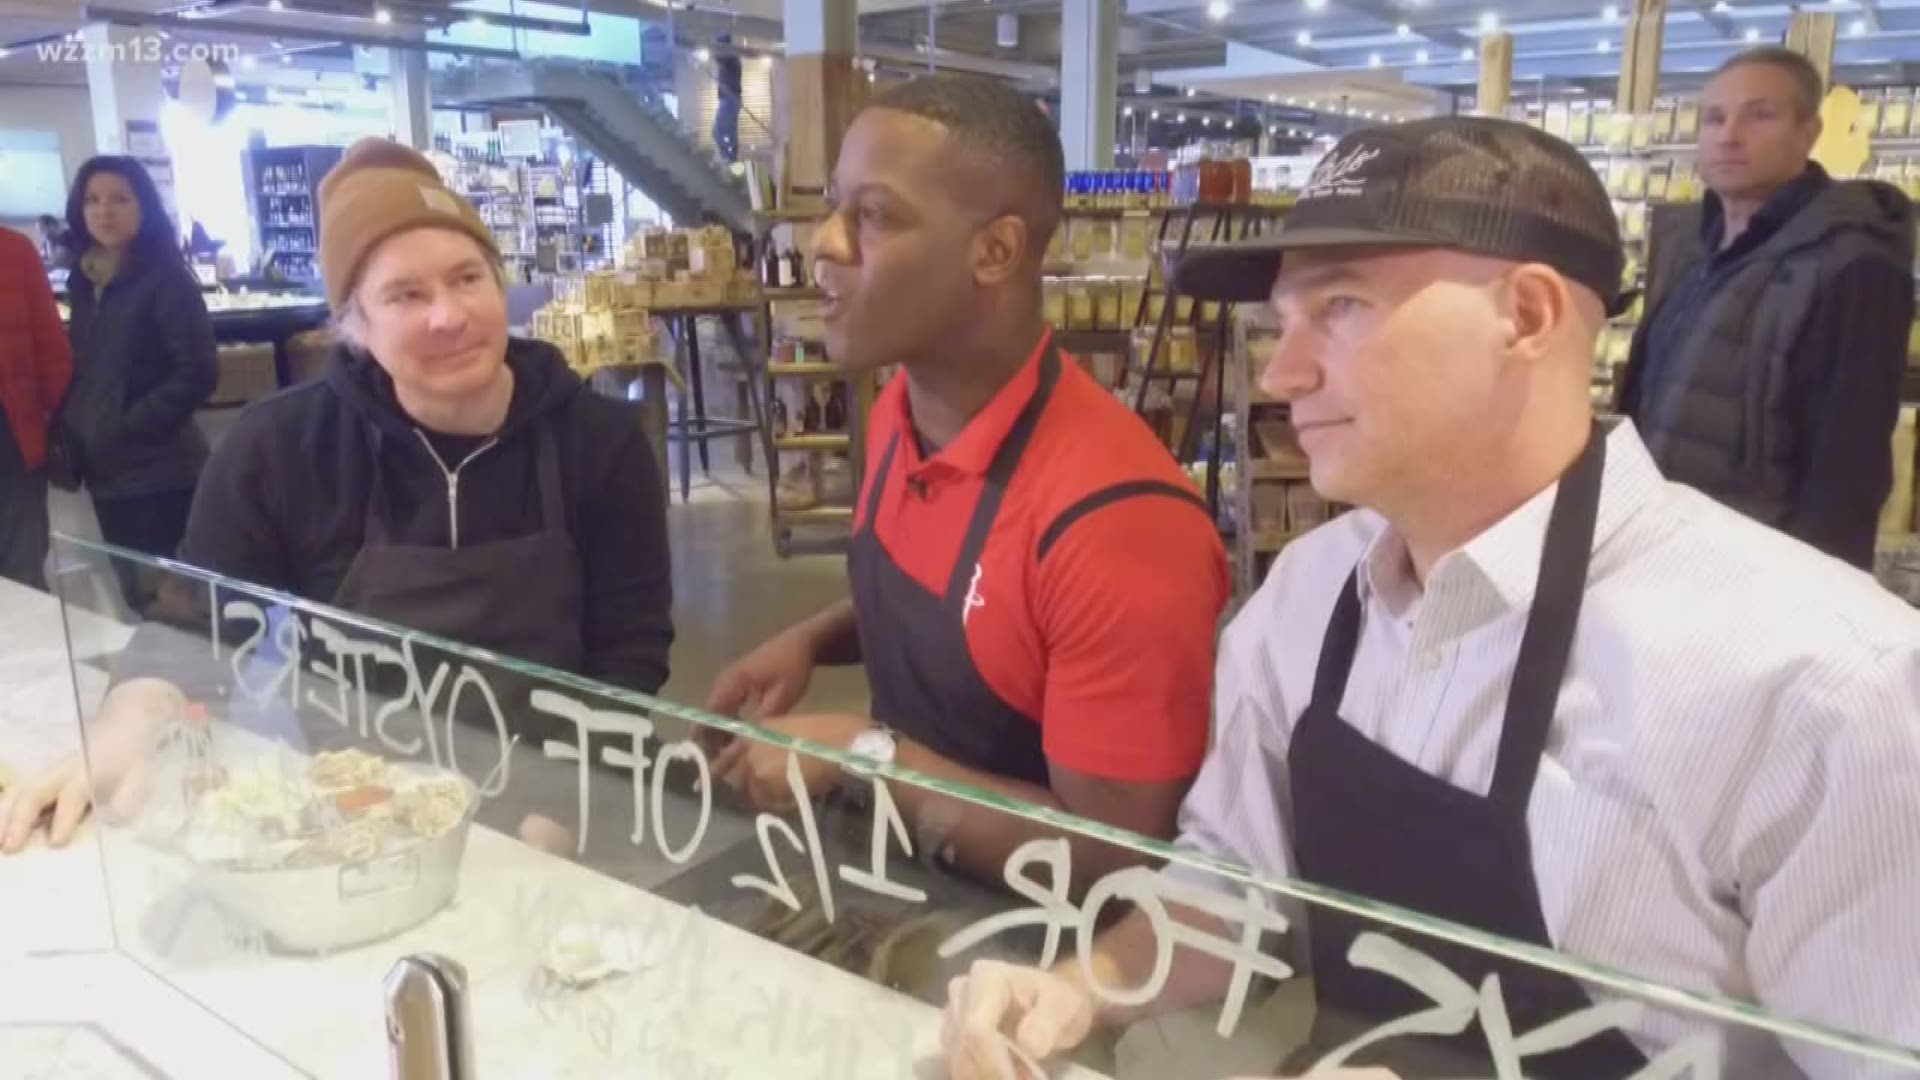 In this edition of "Let's Eat", Dave Kaechele and James Starks find out what it's like to have some of West Michigan's greatest seafood.